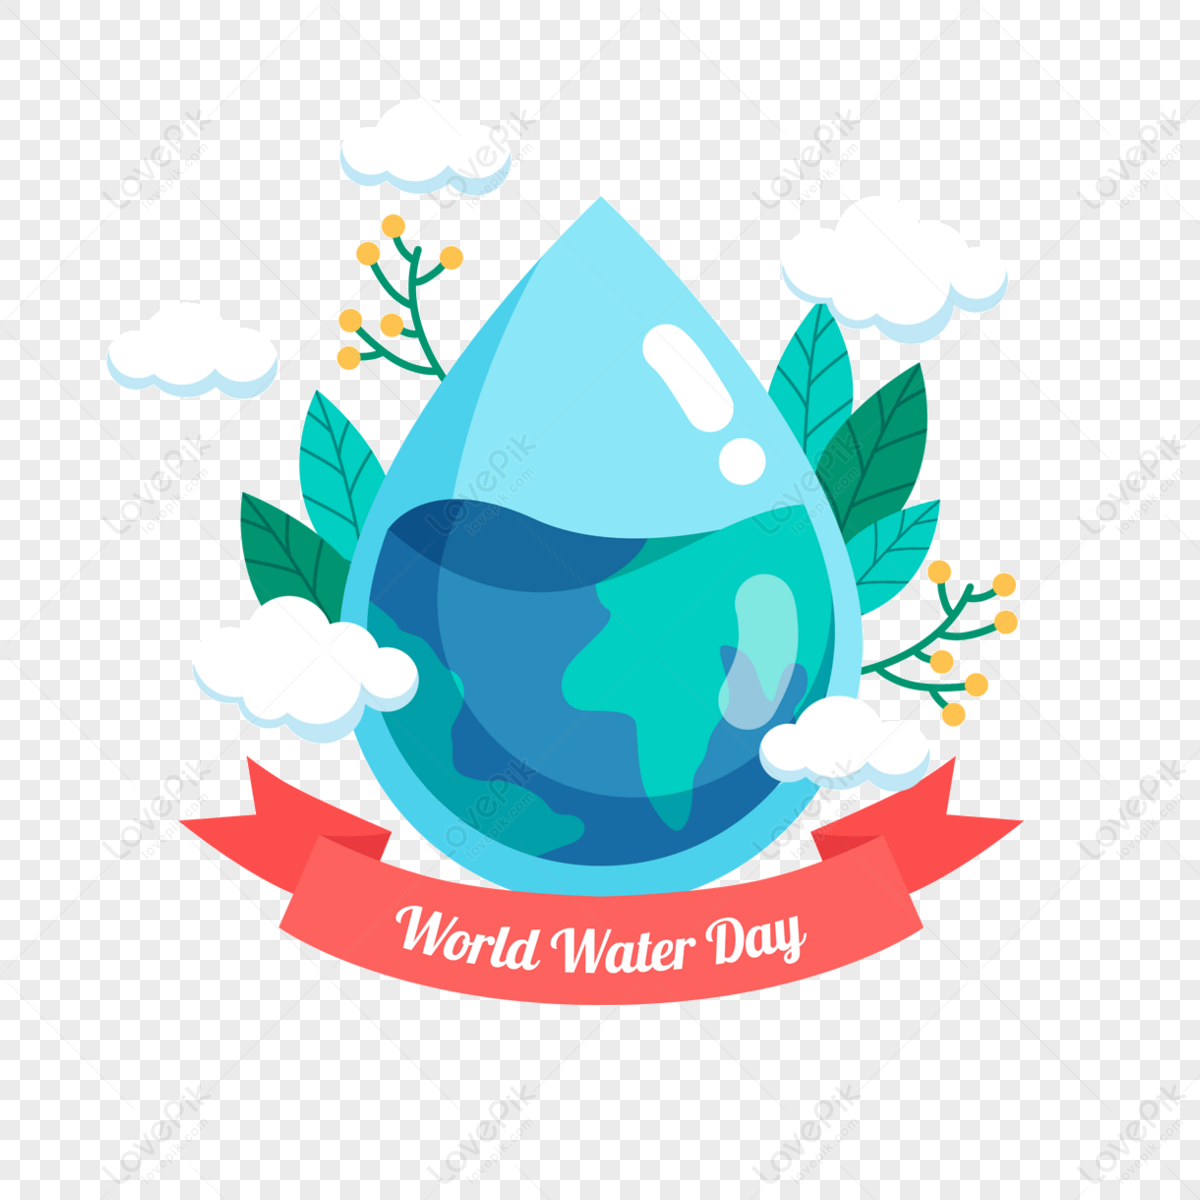 50+ Best World Water Day Transparent Background Images Free Download